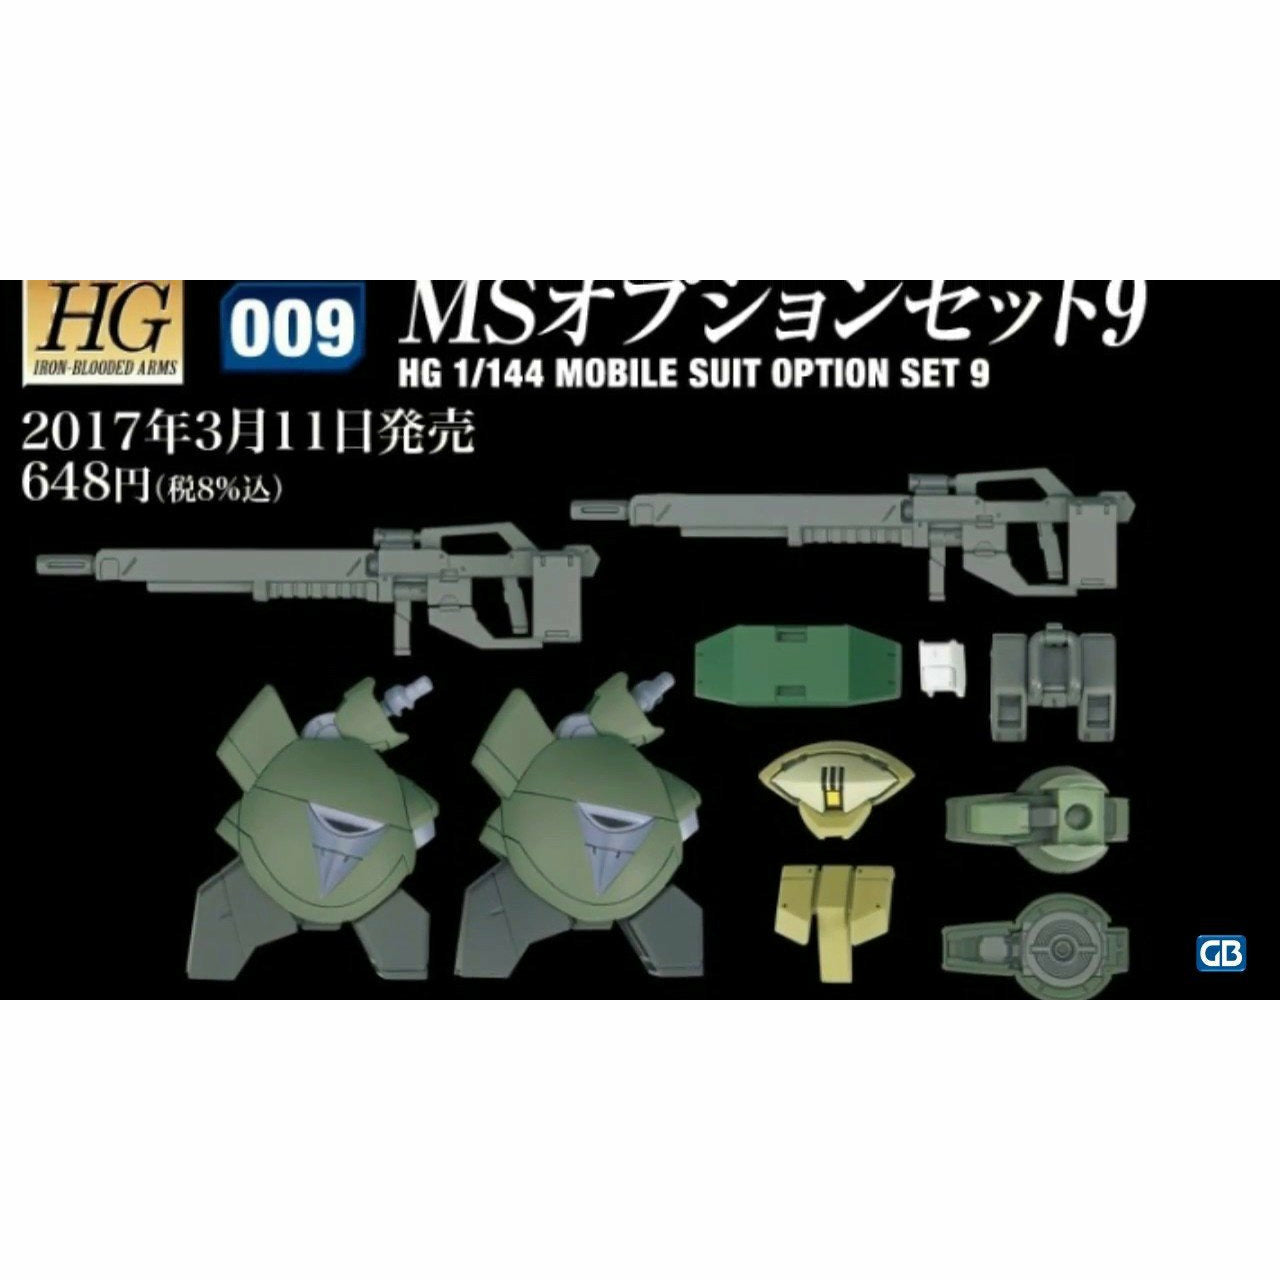 HG 1/144 Iron-Blooded Orphans MS Option Set 9 #5055898 by Bandai